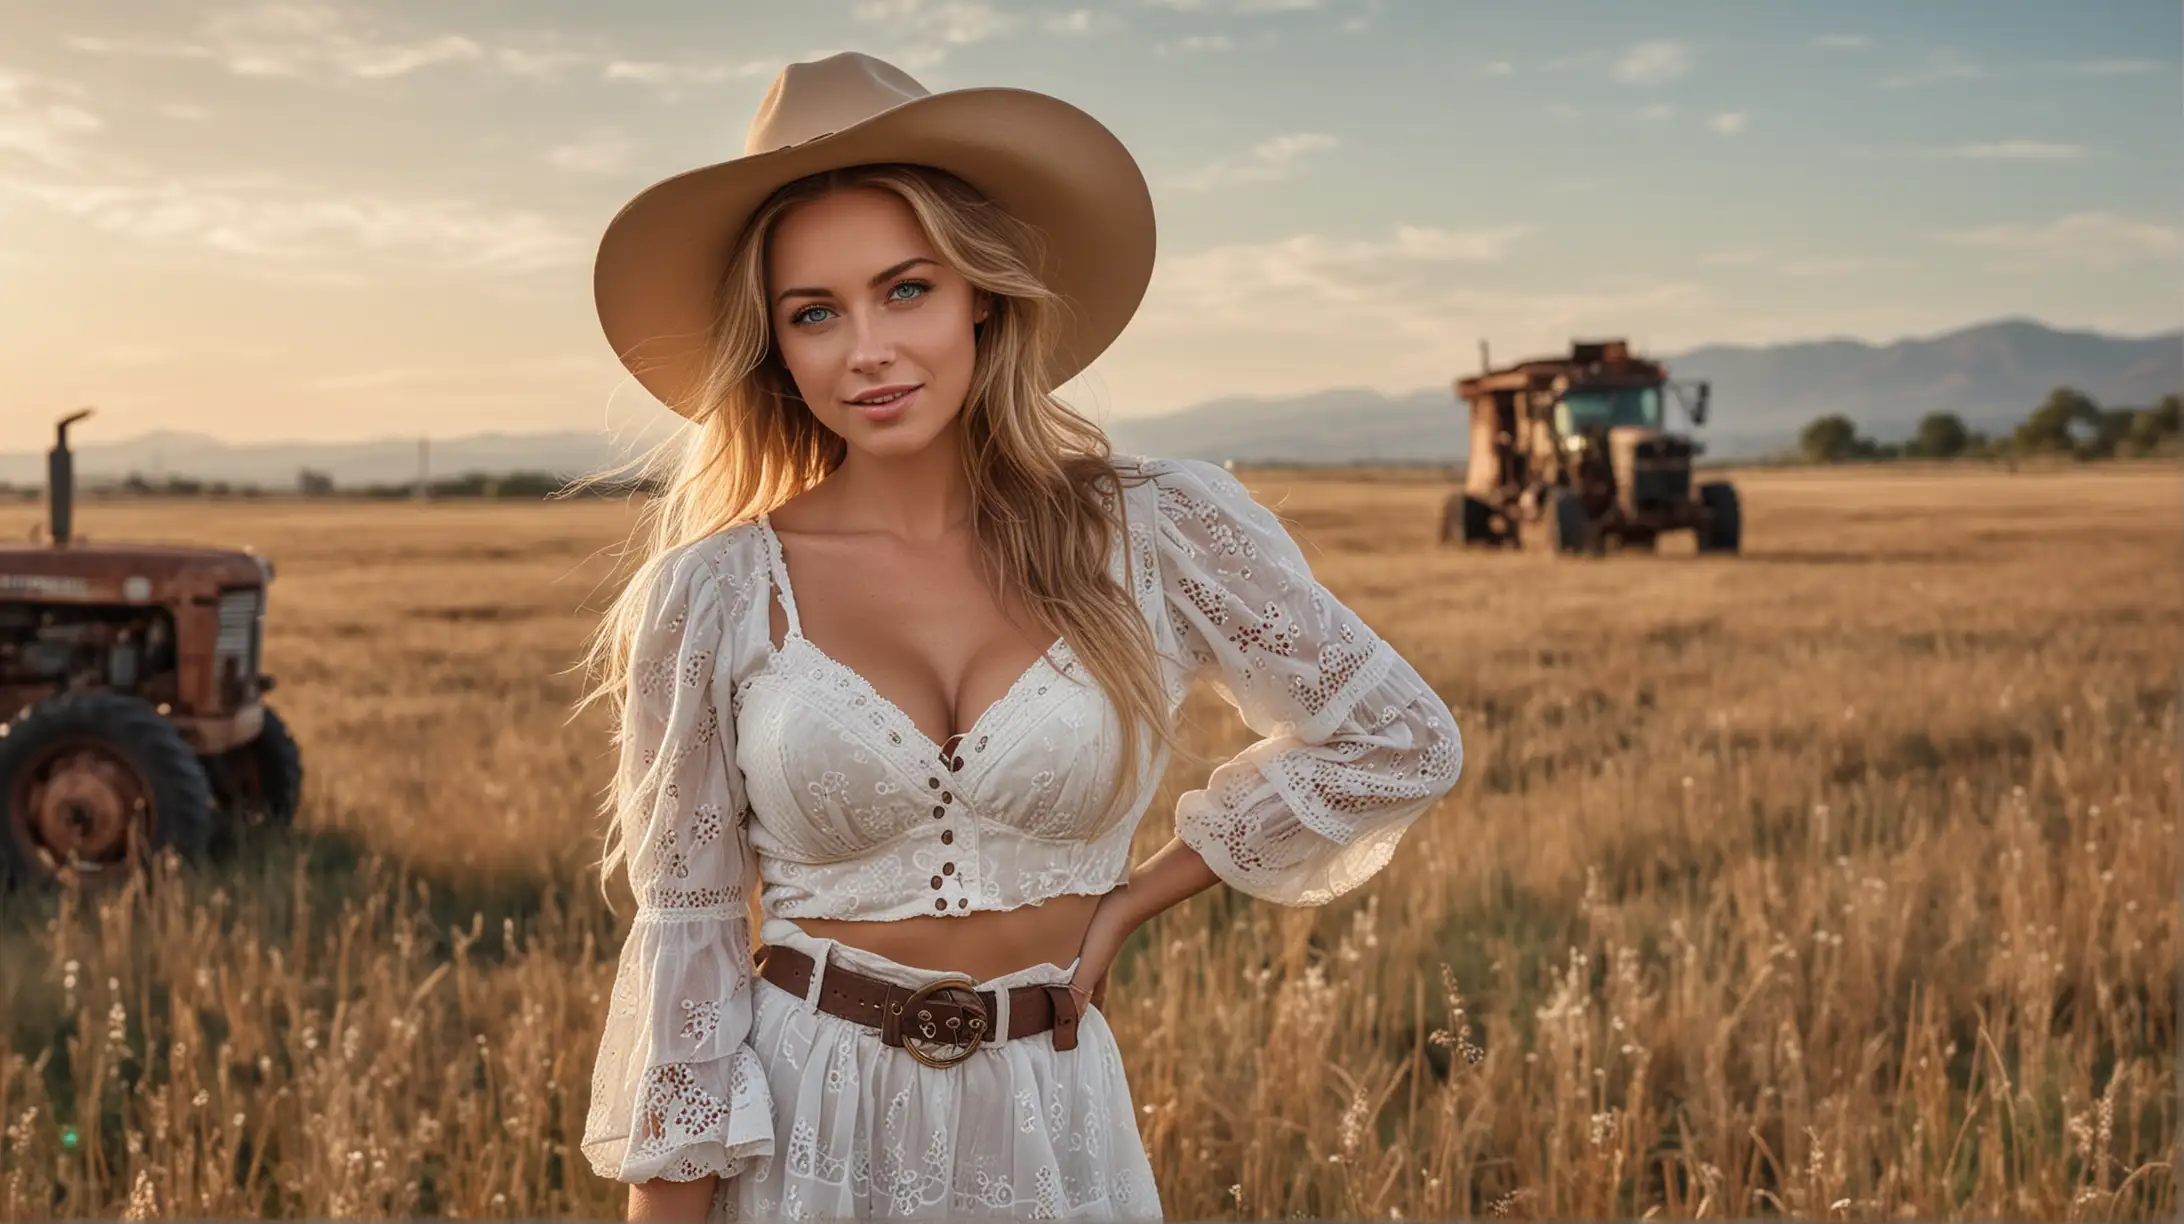 Stunning Country Woman in Sundress and Cowboy Hat Poses by Rusted Tractor at Sunset